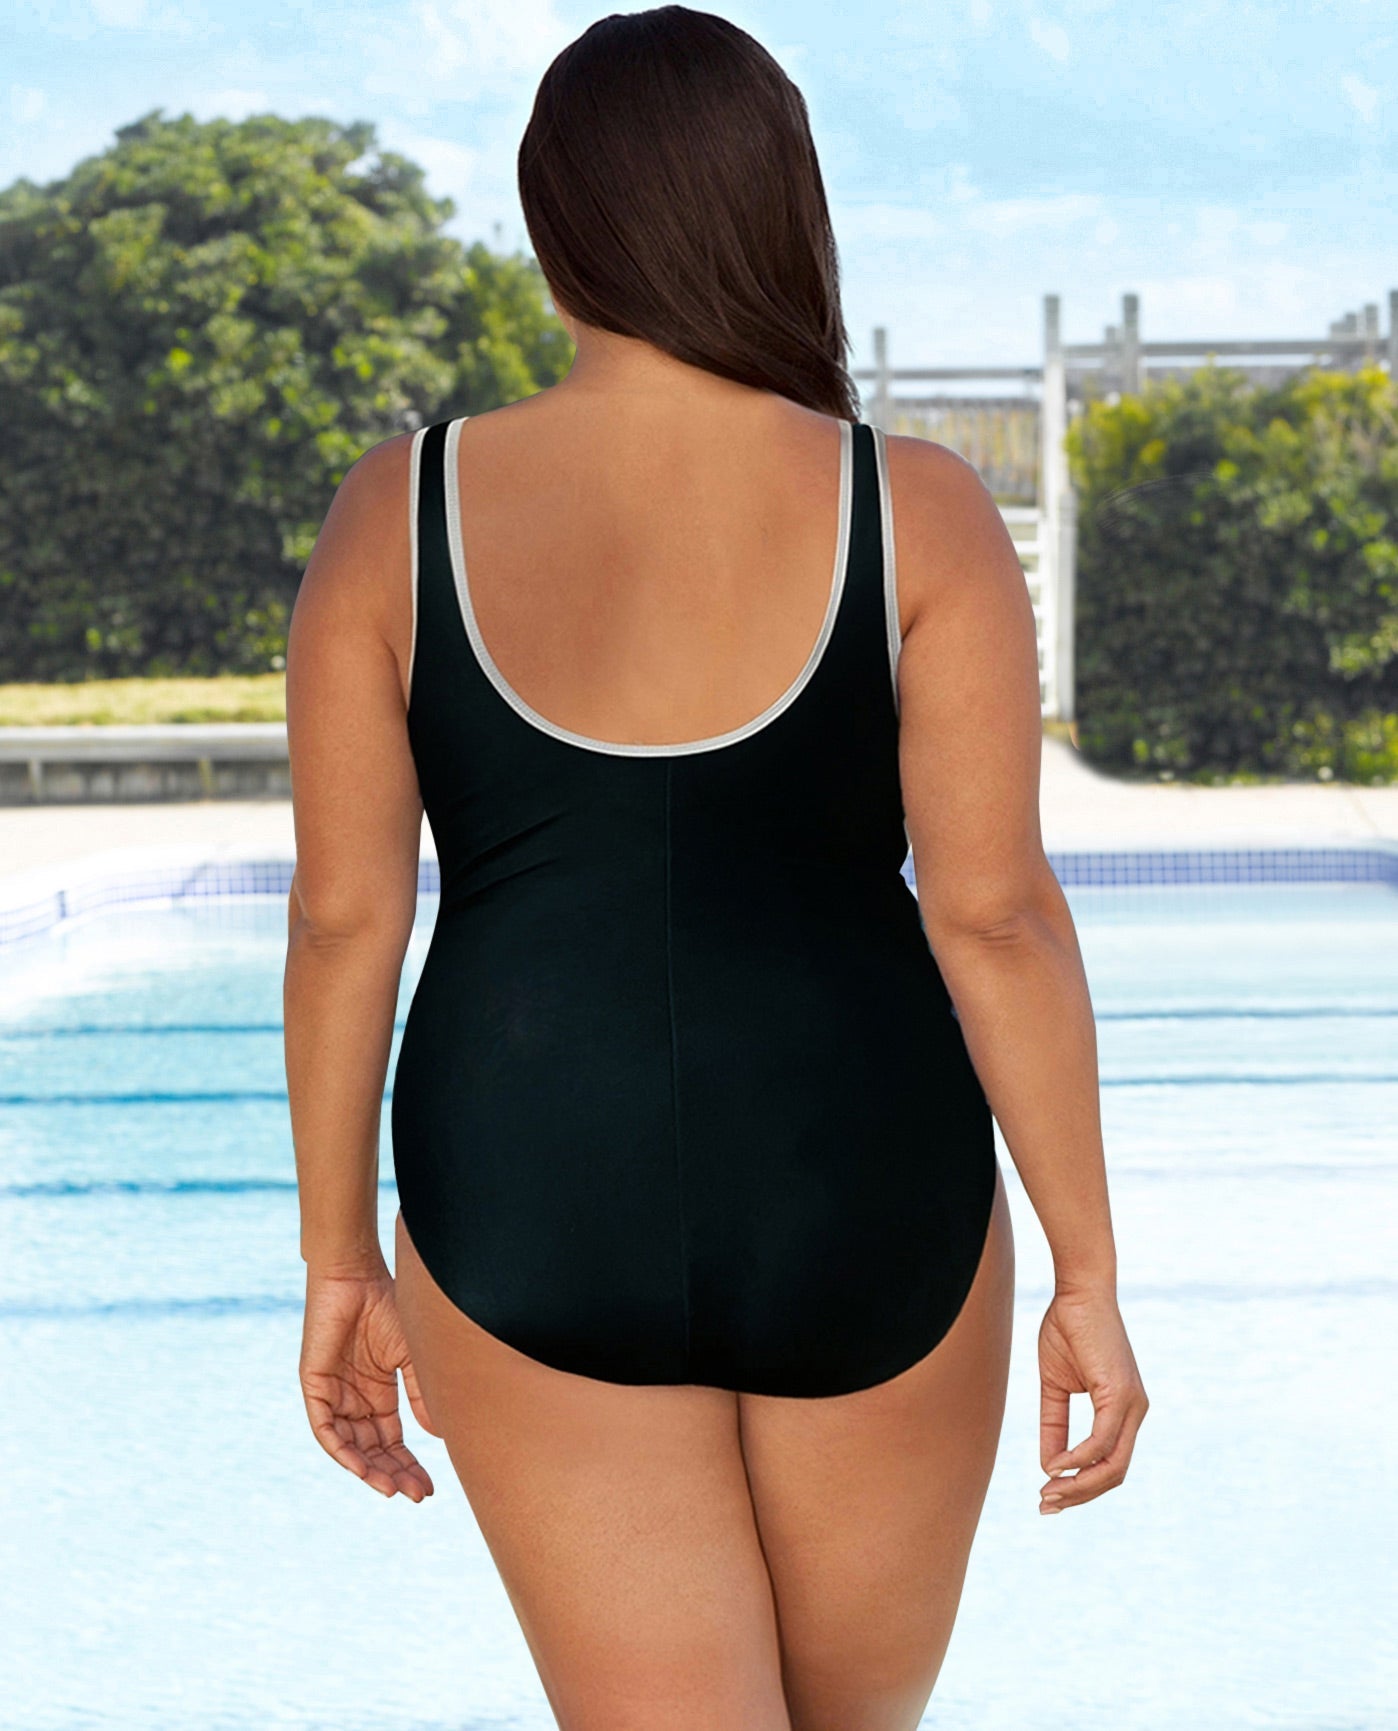 BACK VIEW OF CHLORINE RESISTANT AQUAMORE STRIPED ZIPPER HIGH NECK PLUS SIZE SWIMSUIT | 056 AQM DEEP TEAL STRIPE